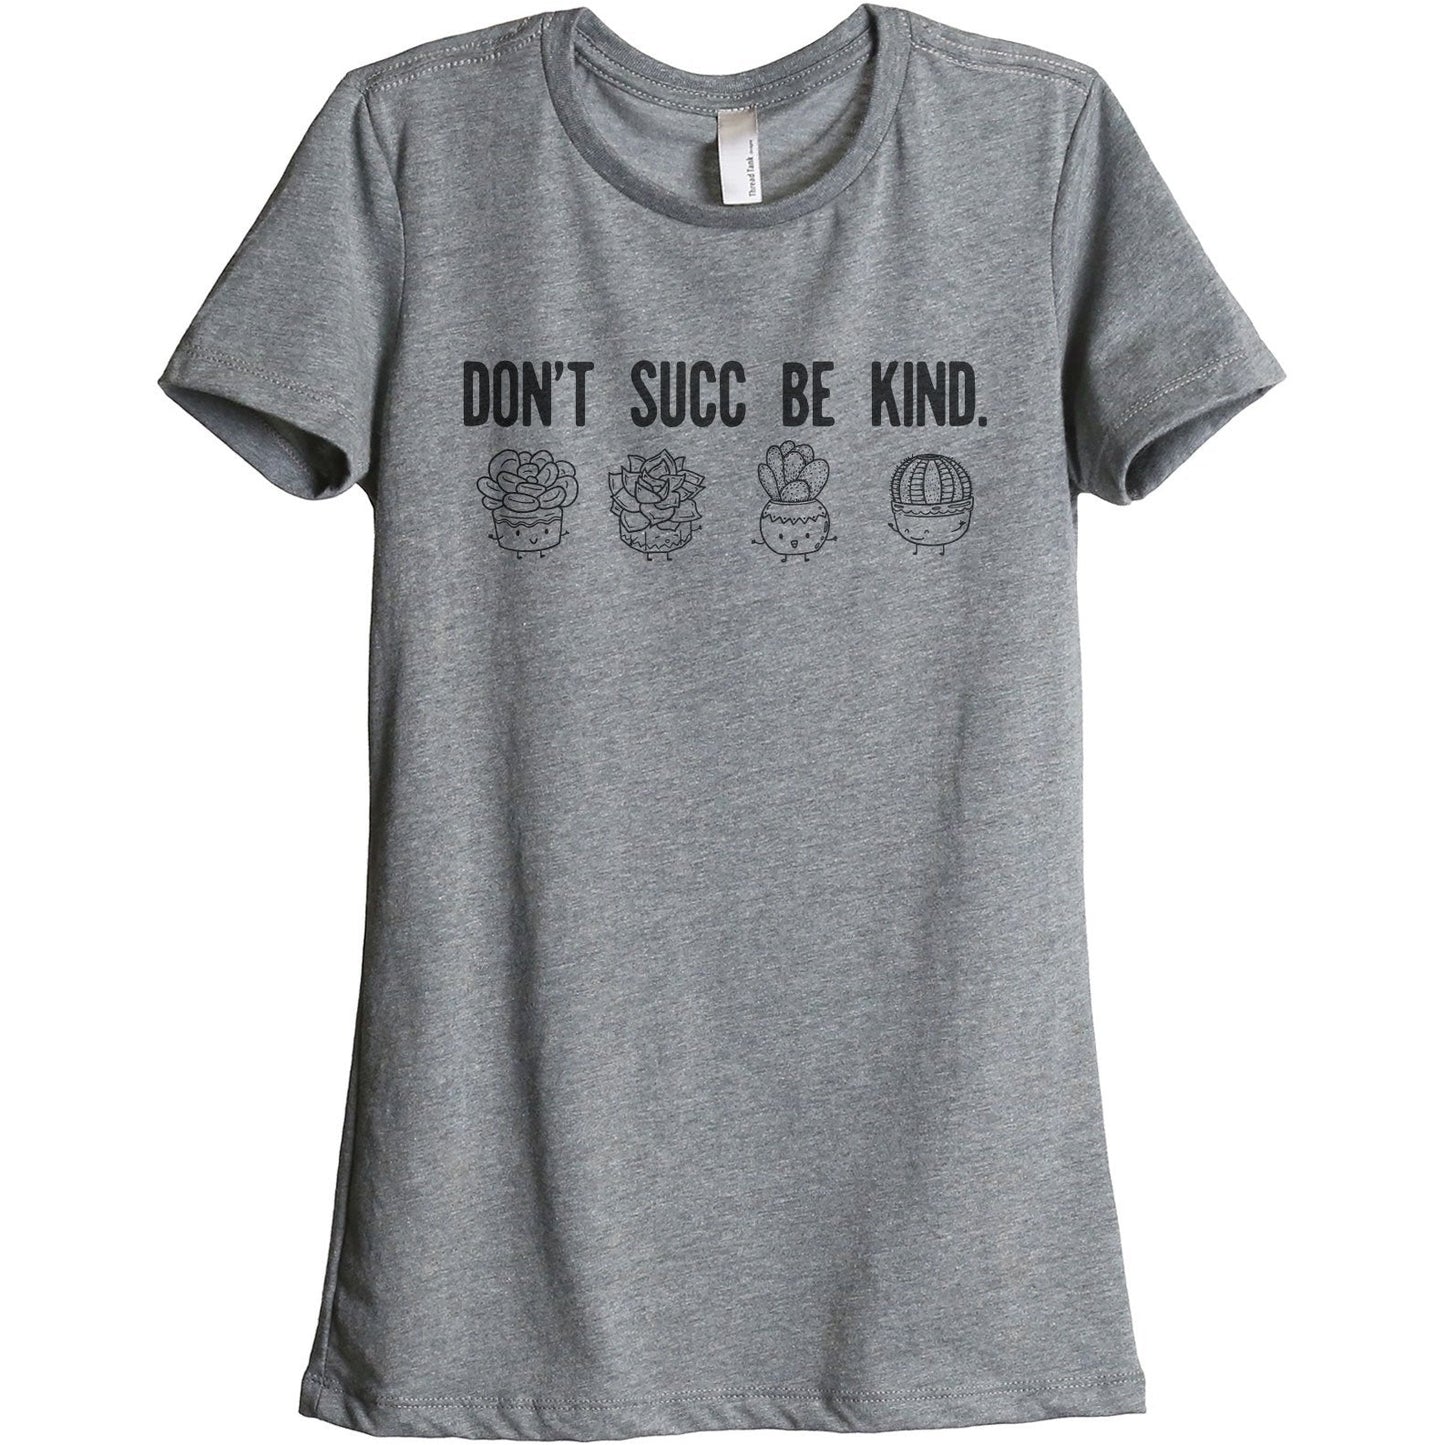 Don't Succ Be Kind Women's Relaxed Crewneck T-Shirt Top Tee Heather Grey